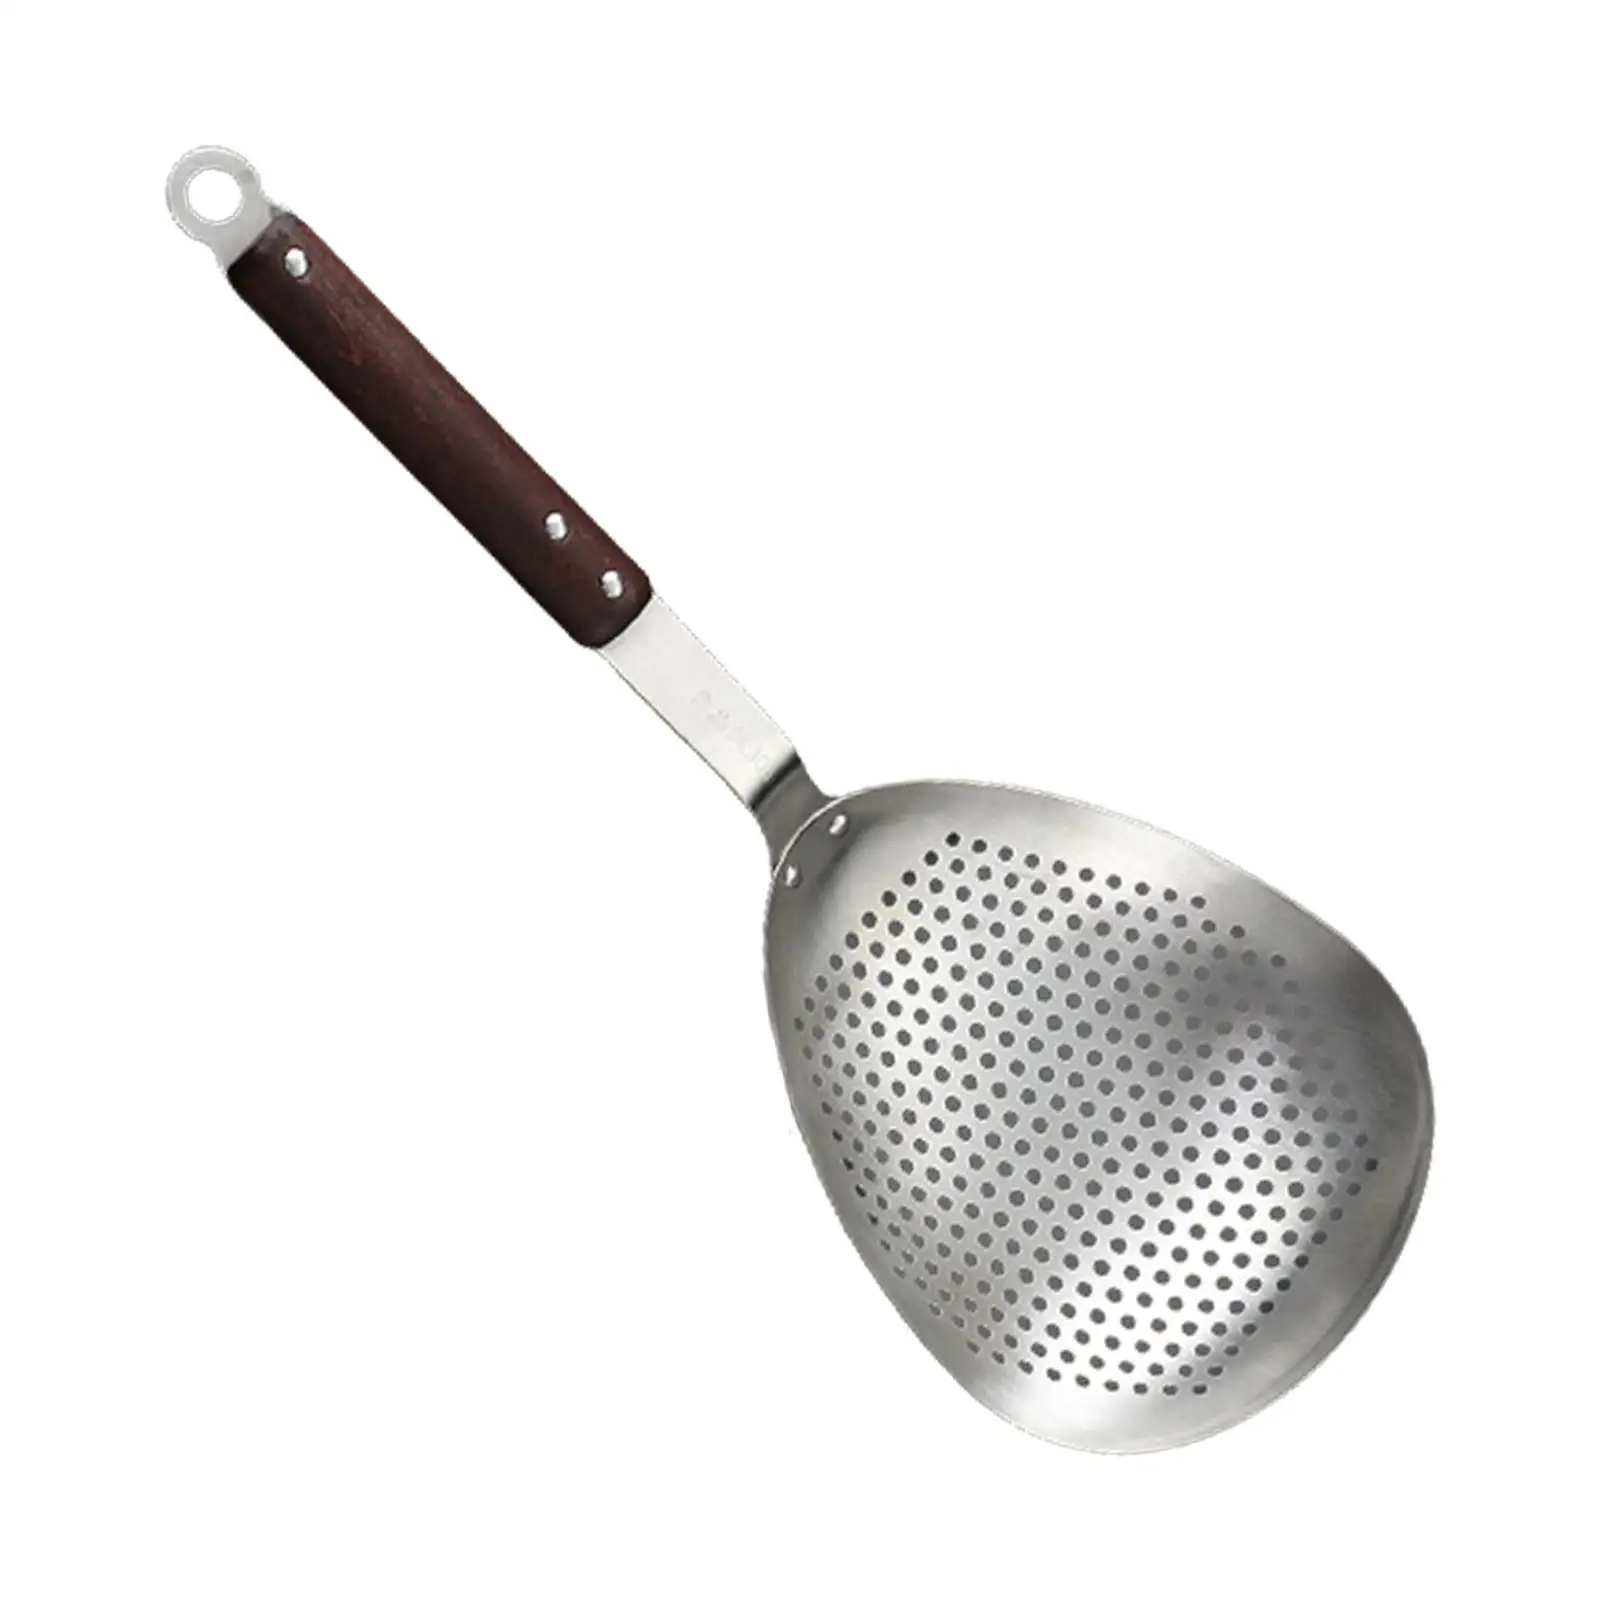 Professional Skimmer Slotted Spoon with Wooden Handle Comfortable Grip Cooking Colander Spoon for Pasta Frying Dumpling Noodles